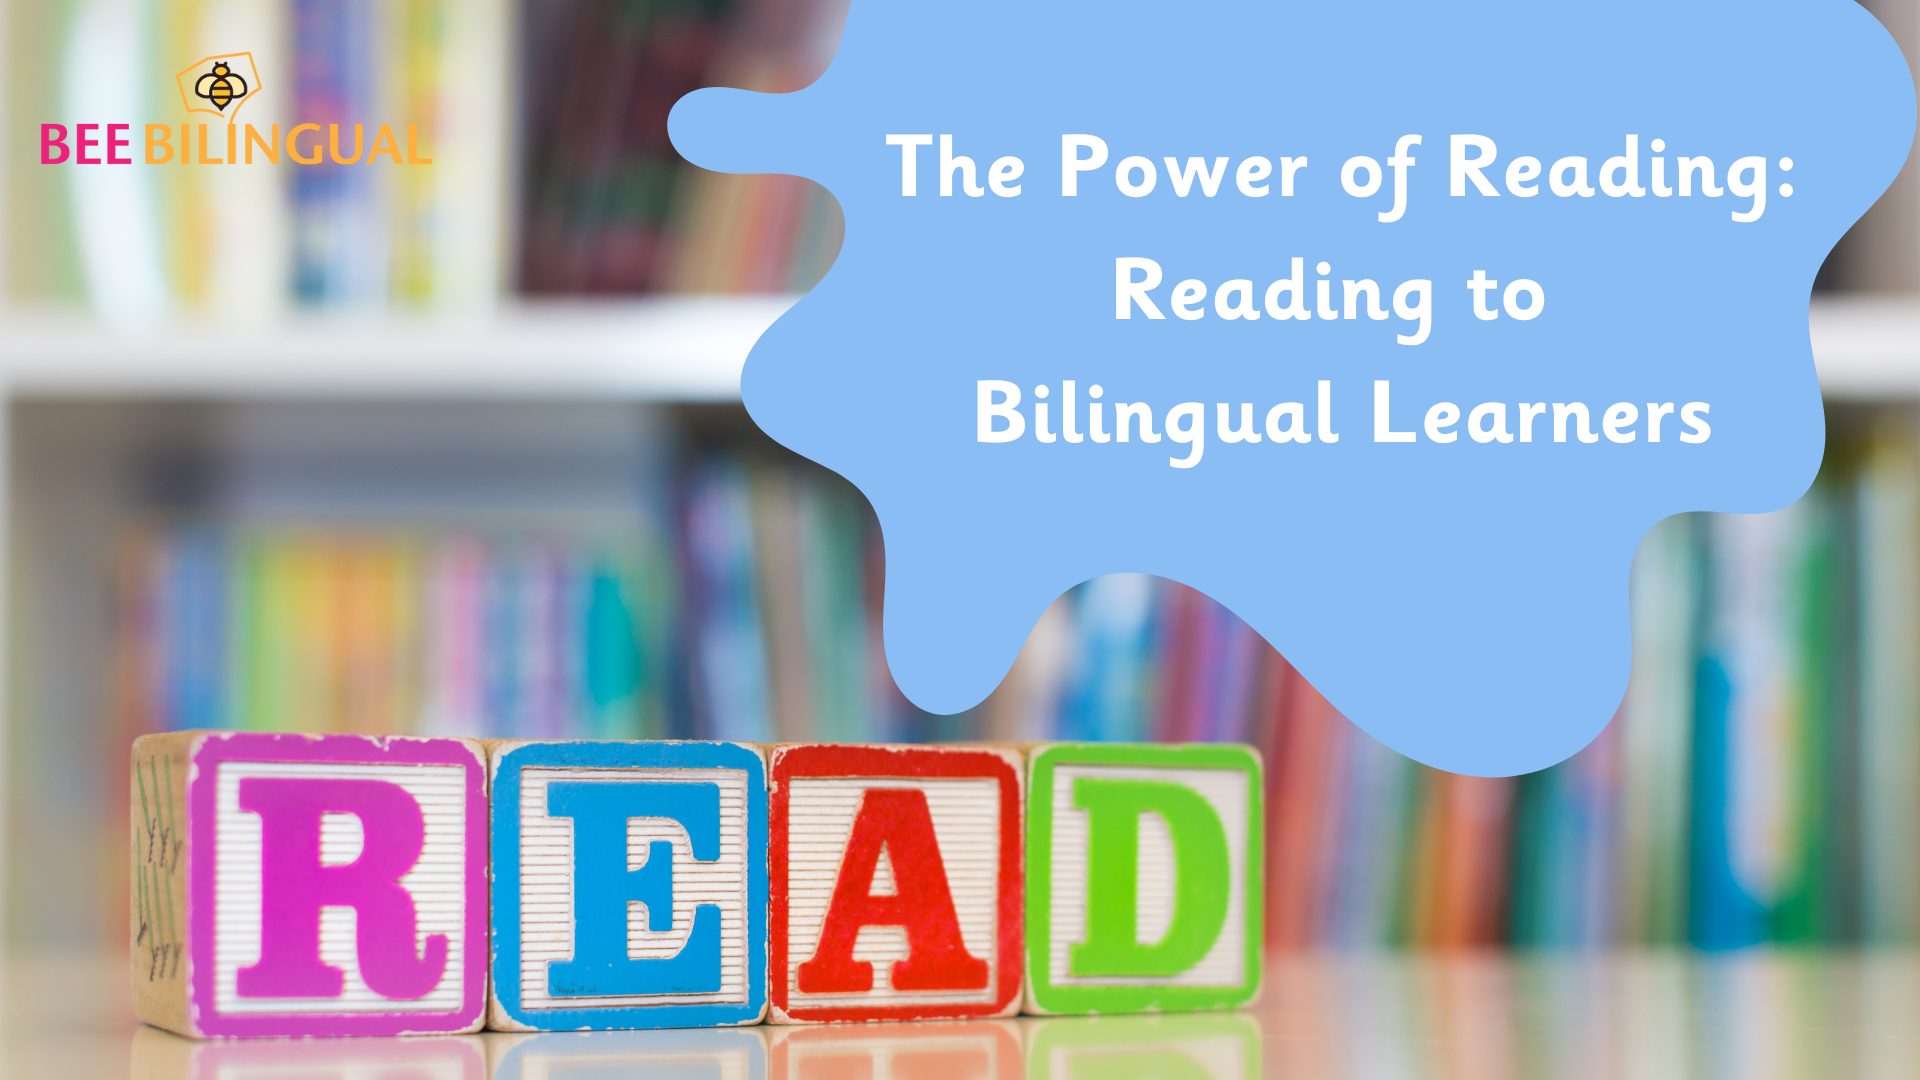 Reading to bilingual learners